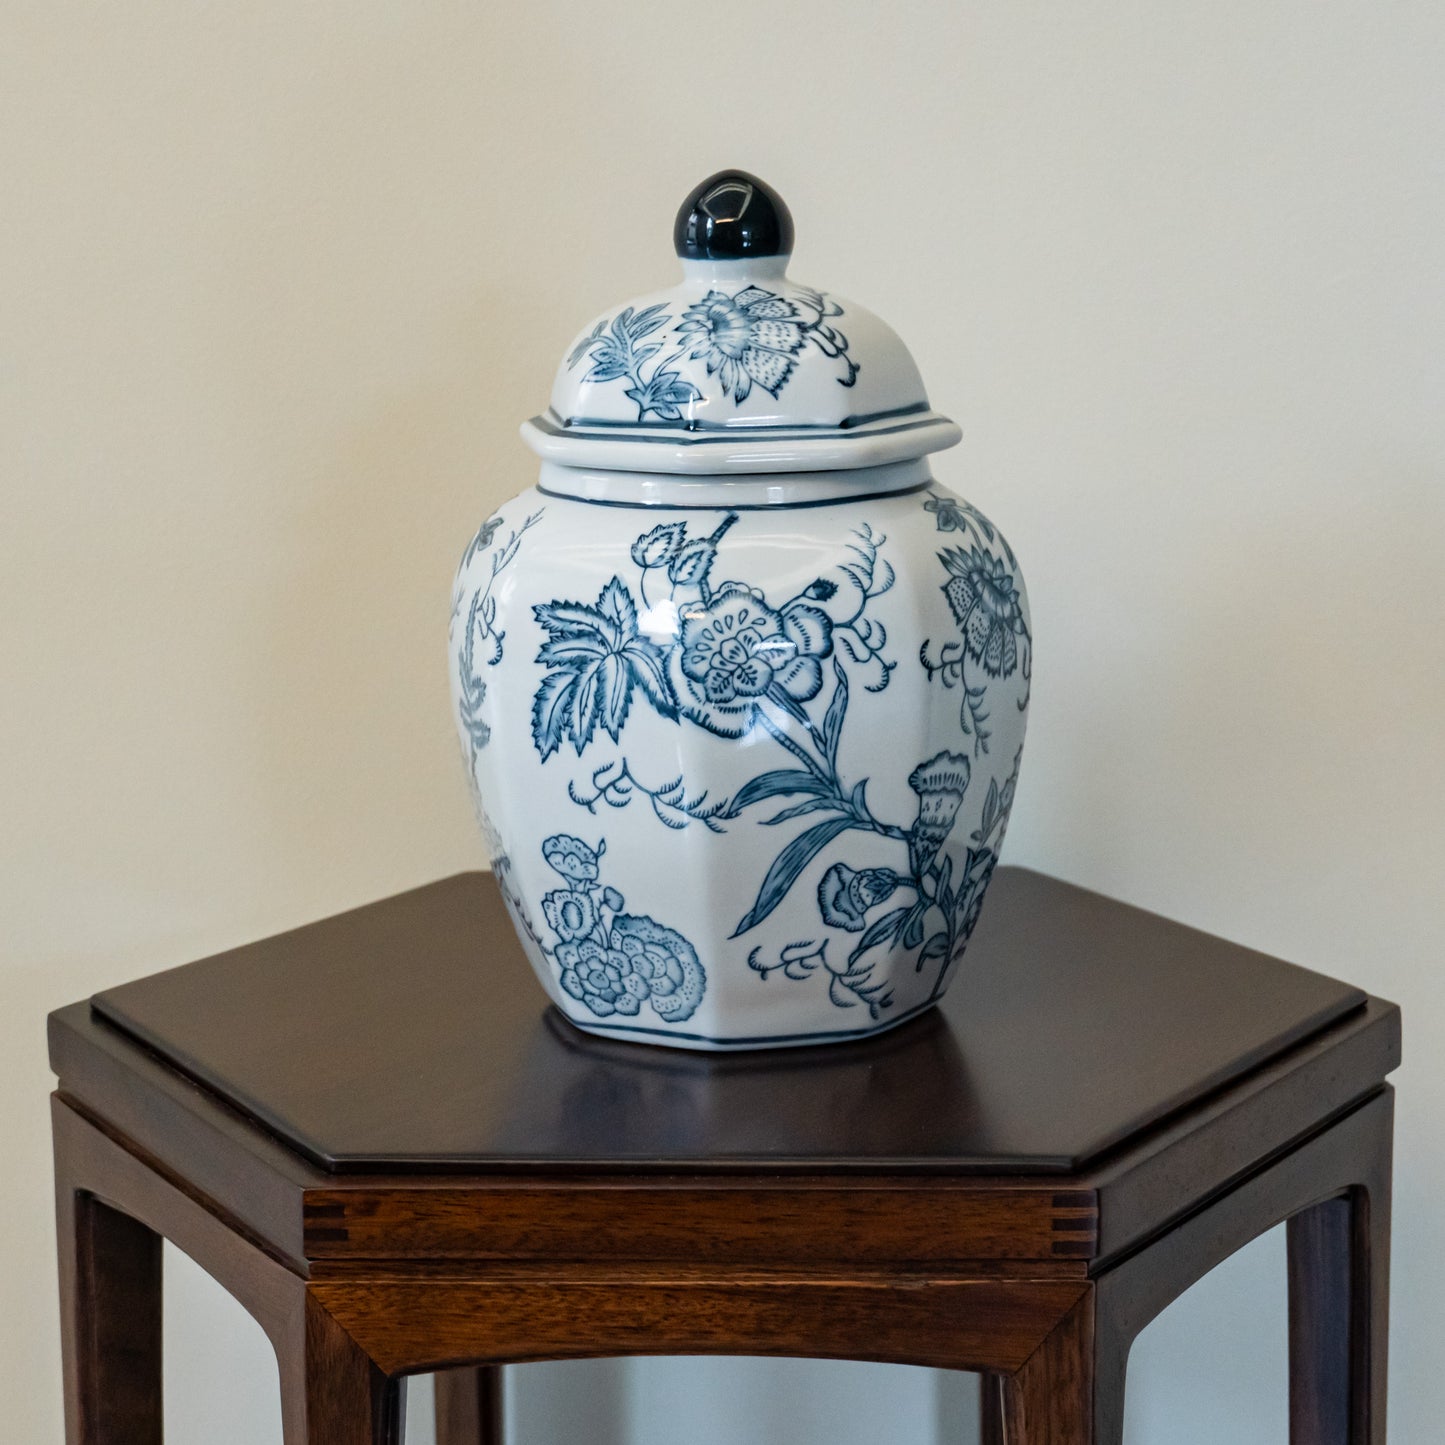 Traditional Blue and White Floral Porcelain Jar with Lid - Classic Chinese Decorative Piece - Artistic Home Accent, Unique Asian Home Decor